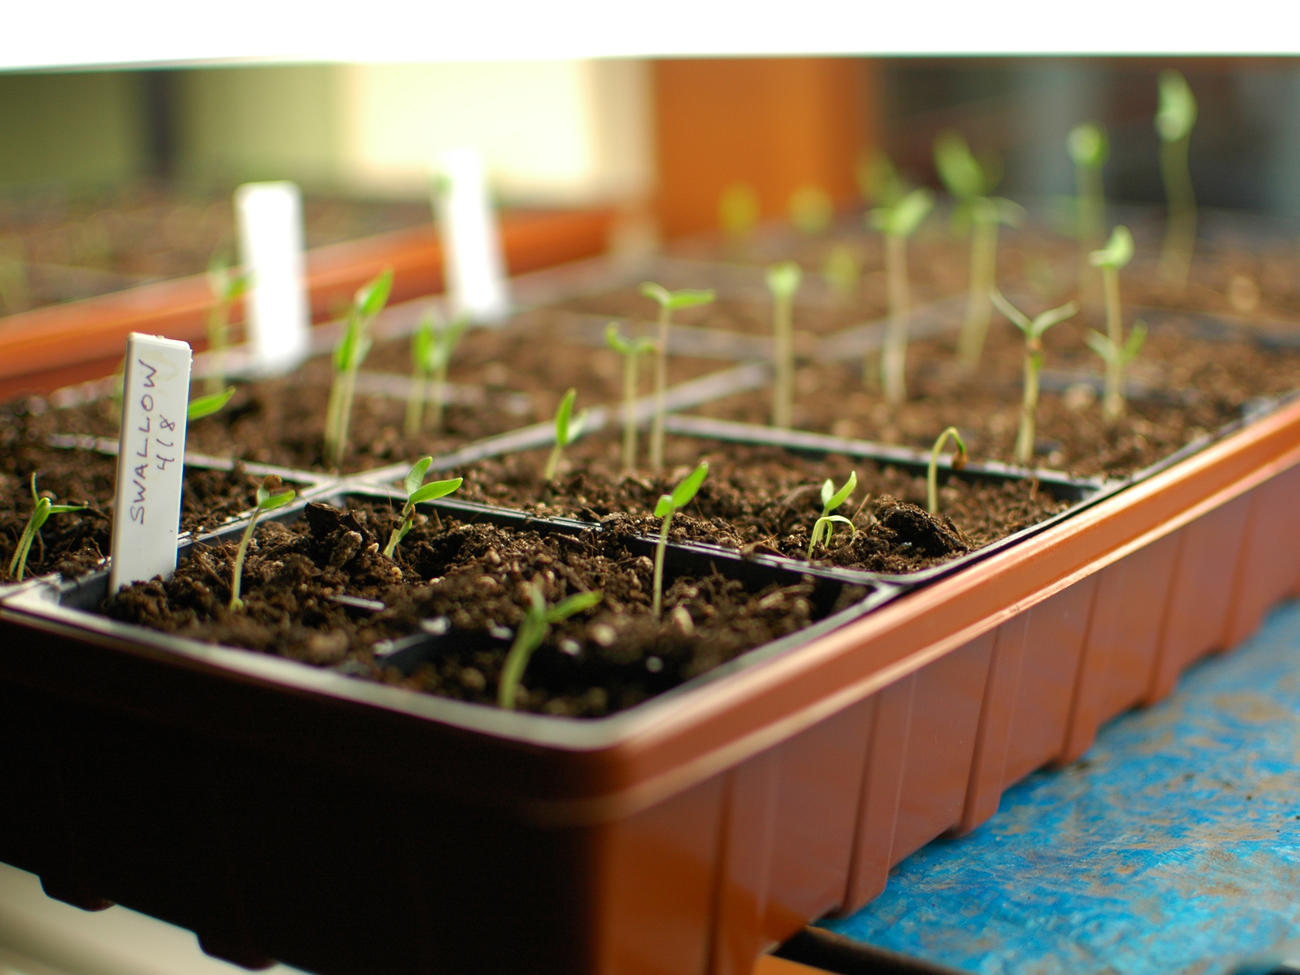 Seedling Care: Transplanting, Thinning, and Preventing Disease